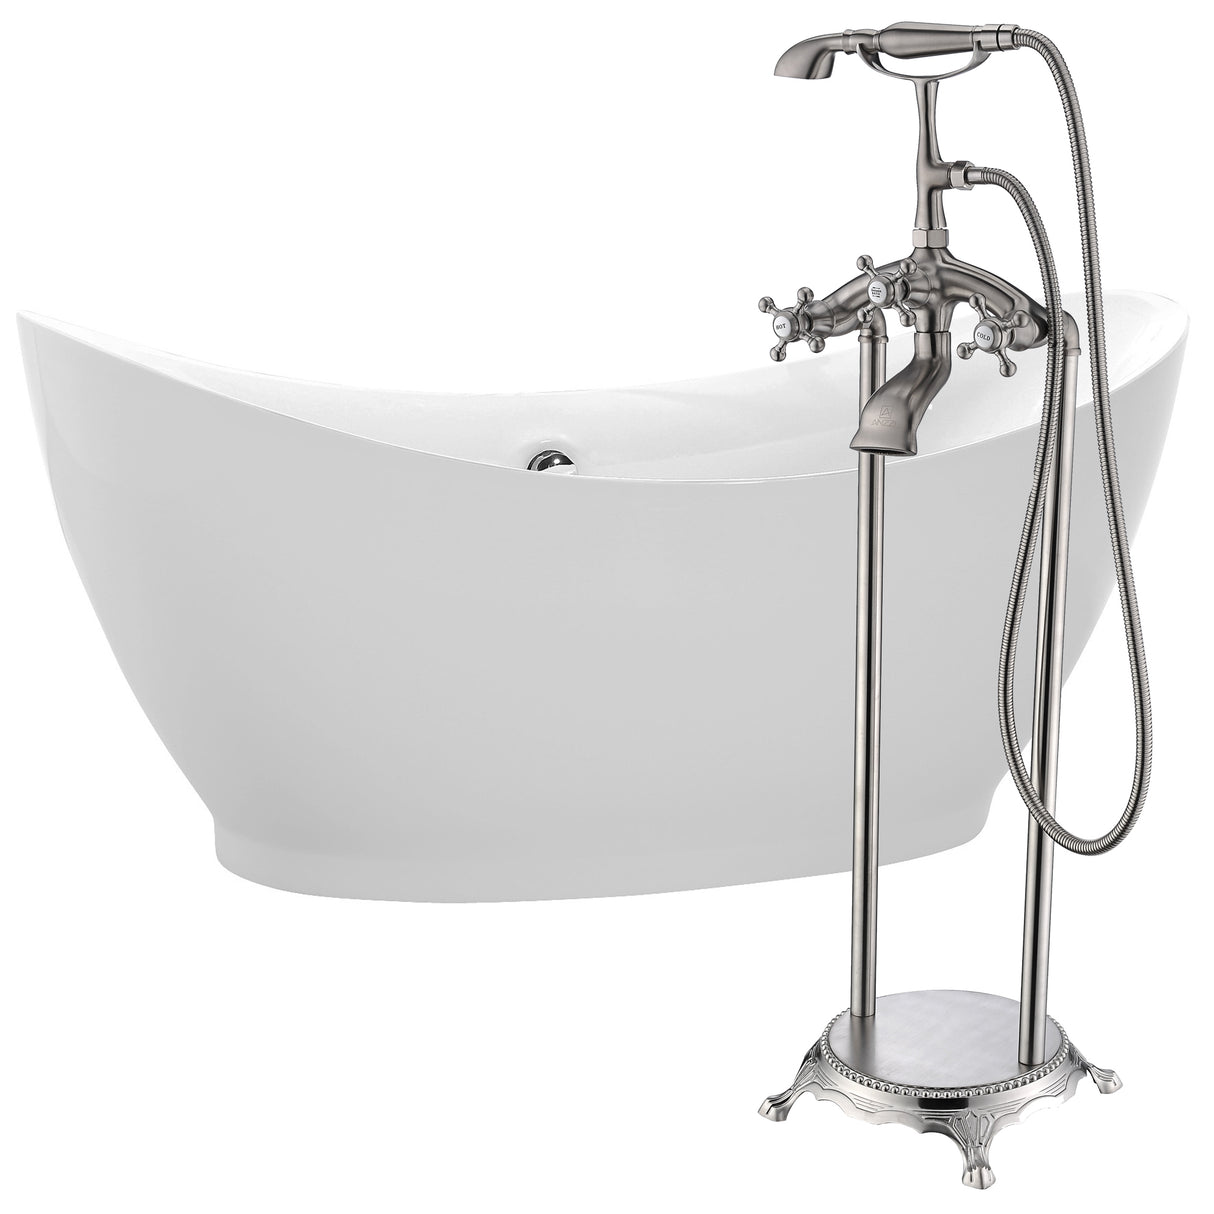 ANZZI FTAZ091-0052B Reginald 68 in. Acrylic Soaking Bathtub in White with Tugela Faucet in Brushed Nickel